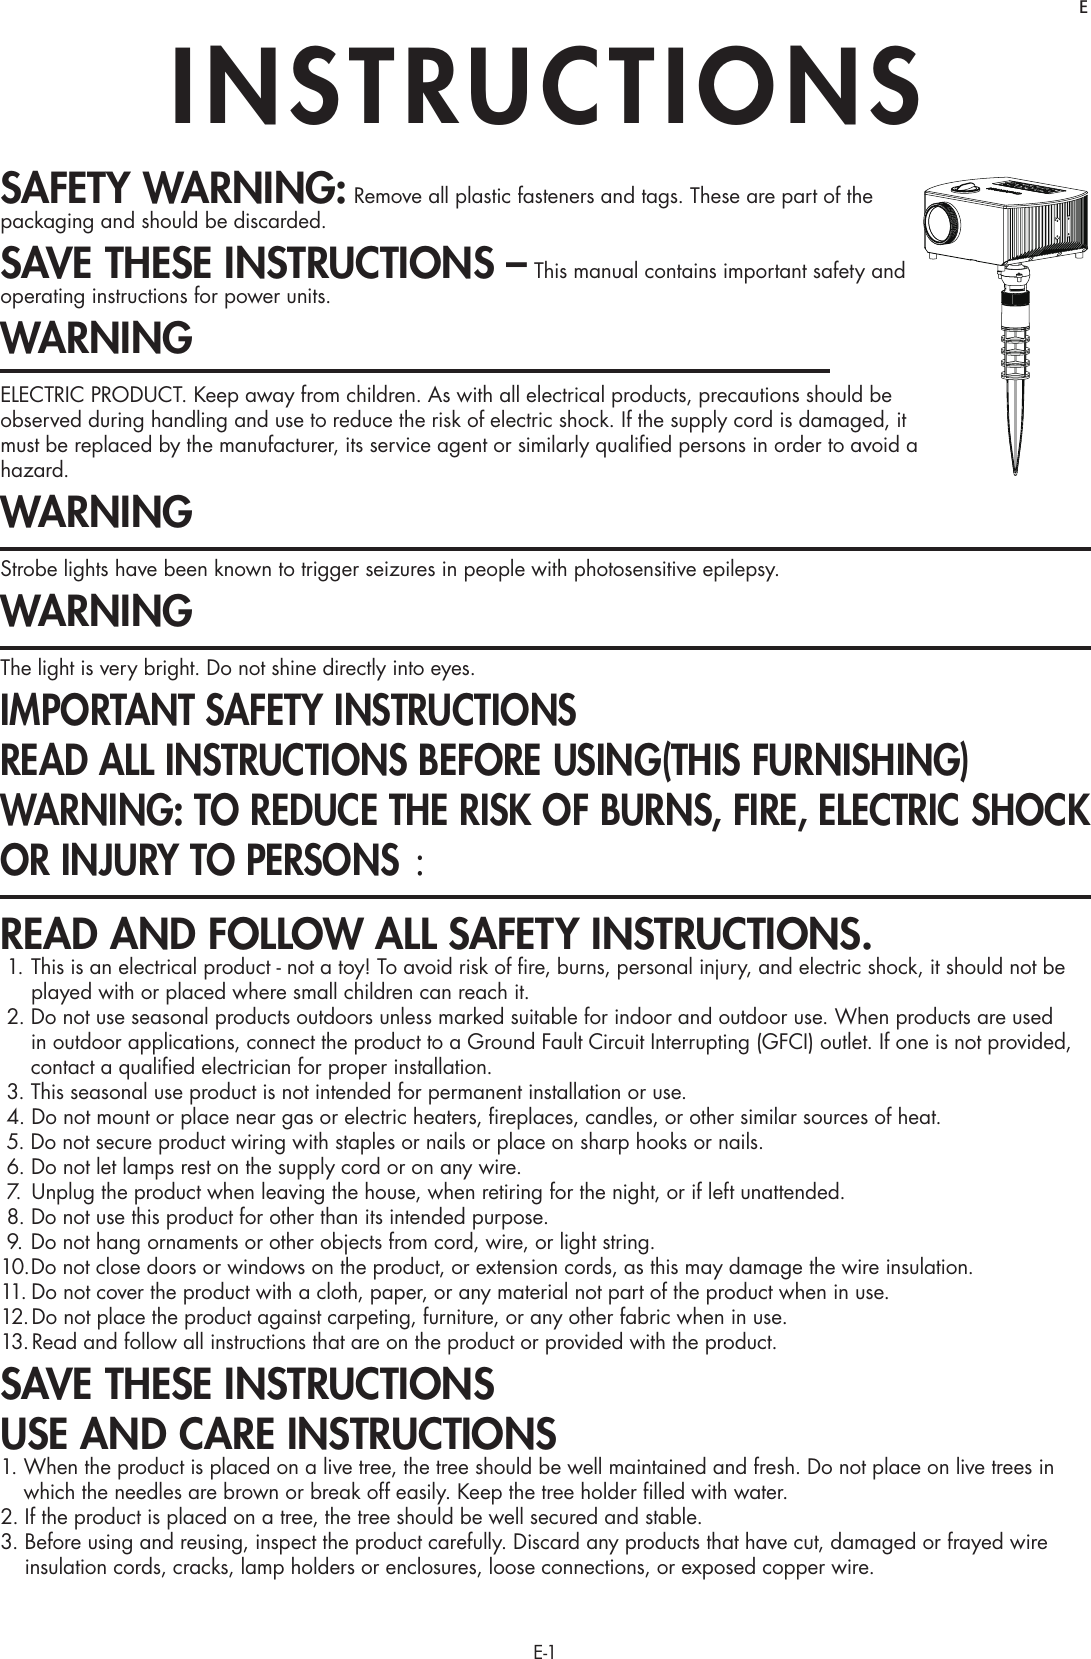 E-1SAFETY WARNING: Remove all plastic fasteners and tags. These are part of the packaging and should be discarded.SAVE THESE INSTRUCTIONS – This manual contains important safety and operating instructions for power units.WARNINGELECTRIC PRODUCT. Keep away from children. As with all electrical products, precautions should be observed during handling and use to reduce the risk of electric shock. If the supply cord is damaged, it must be replaced by the manufacturer, its service agent or similarly qualiﬁed persons in order to avoid a hazard.WARNINGStrobe lights have been known to trigger seizures in people with photosensitive epilepsy.WARNINGThe light is very bright. Do not shine directly into eyes.IMPORTANT SAFETY INSTRUCTIONS READ ALL INSTRUCTIONS BEFORE USING(THIS FURNISHING)WARNING: TO REDUCE THE RISK OF BURNS, FIRE, ELECTRIC SHOCK OR INJURY TO PERSONS ： READ AND FOLLOW ALL SAFETY INSTRUCTIONS. 1.  This is an electrical product - not a toy! To avoid risk of ﬁre, burns, personal injury, and electric shock, it should not be played with or placed where small children can reach it. 2.  Do not use seasonal products outdoors unless marked suitable for indoor and outdoor use. When products are used in outdoor applications, connect the product to a Ground Fault Circuit Interrupting (GFCI) outlet. If one is not provided, contact a qualiﬁed electrician for proper installation.  3. This seasonal use product is not intended for permanent installation or use. 4. Do not mount or place near gas or electric heaters, ﬁreplaces, candles, or other similar sources of heat. 5. Do not secure product wiring with staples or nails or place on sharp hooks or nails. 6. Do not let lamps rest on the supply cord or on any wire. 7.  Unplug the product when leaving the house, when retiring for the night, or if left unattended. 8. Do not use this product for other than its intended purpose. 9. Do not hang ornaments or other objects from cord, wire, or light string.10. Do not close doors or windows on the product, or extension cords, as this may damage the wire insulation.11. Do not cover the product with a cloth, paper, or any material not part of the product when in use.12. Do not place the product against carpeting, furniture, or any other fabric when in use.13. Read and follow all instructions that are on the product or provided with the product.SAVE THESE INSTRUCTIONSUSE AND CARE INSTRUCTIONS1.  When the product is placed on a live tree, the tree should be well maintained and fresh. Do not place on live trees in which the needles are brown or break off easily. Keep the tree holder ﬁlled with water.2.  If the product is placed on a tree, the tree should be well secured and stable.3.  Before using and reusing, inspect the product carefully. Discard any products that have cut, damaged or frayed wire insulation cords, cracks, lamp holders or enclosures, loose connections, or exposed copper wire.INSTRUCTIONSE